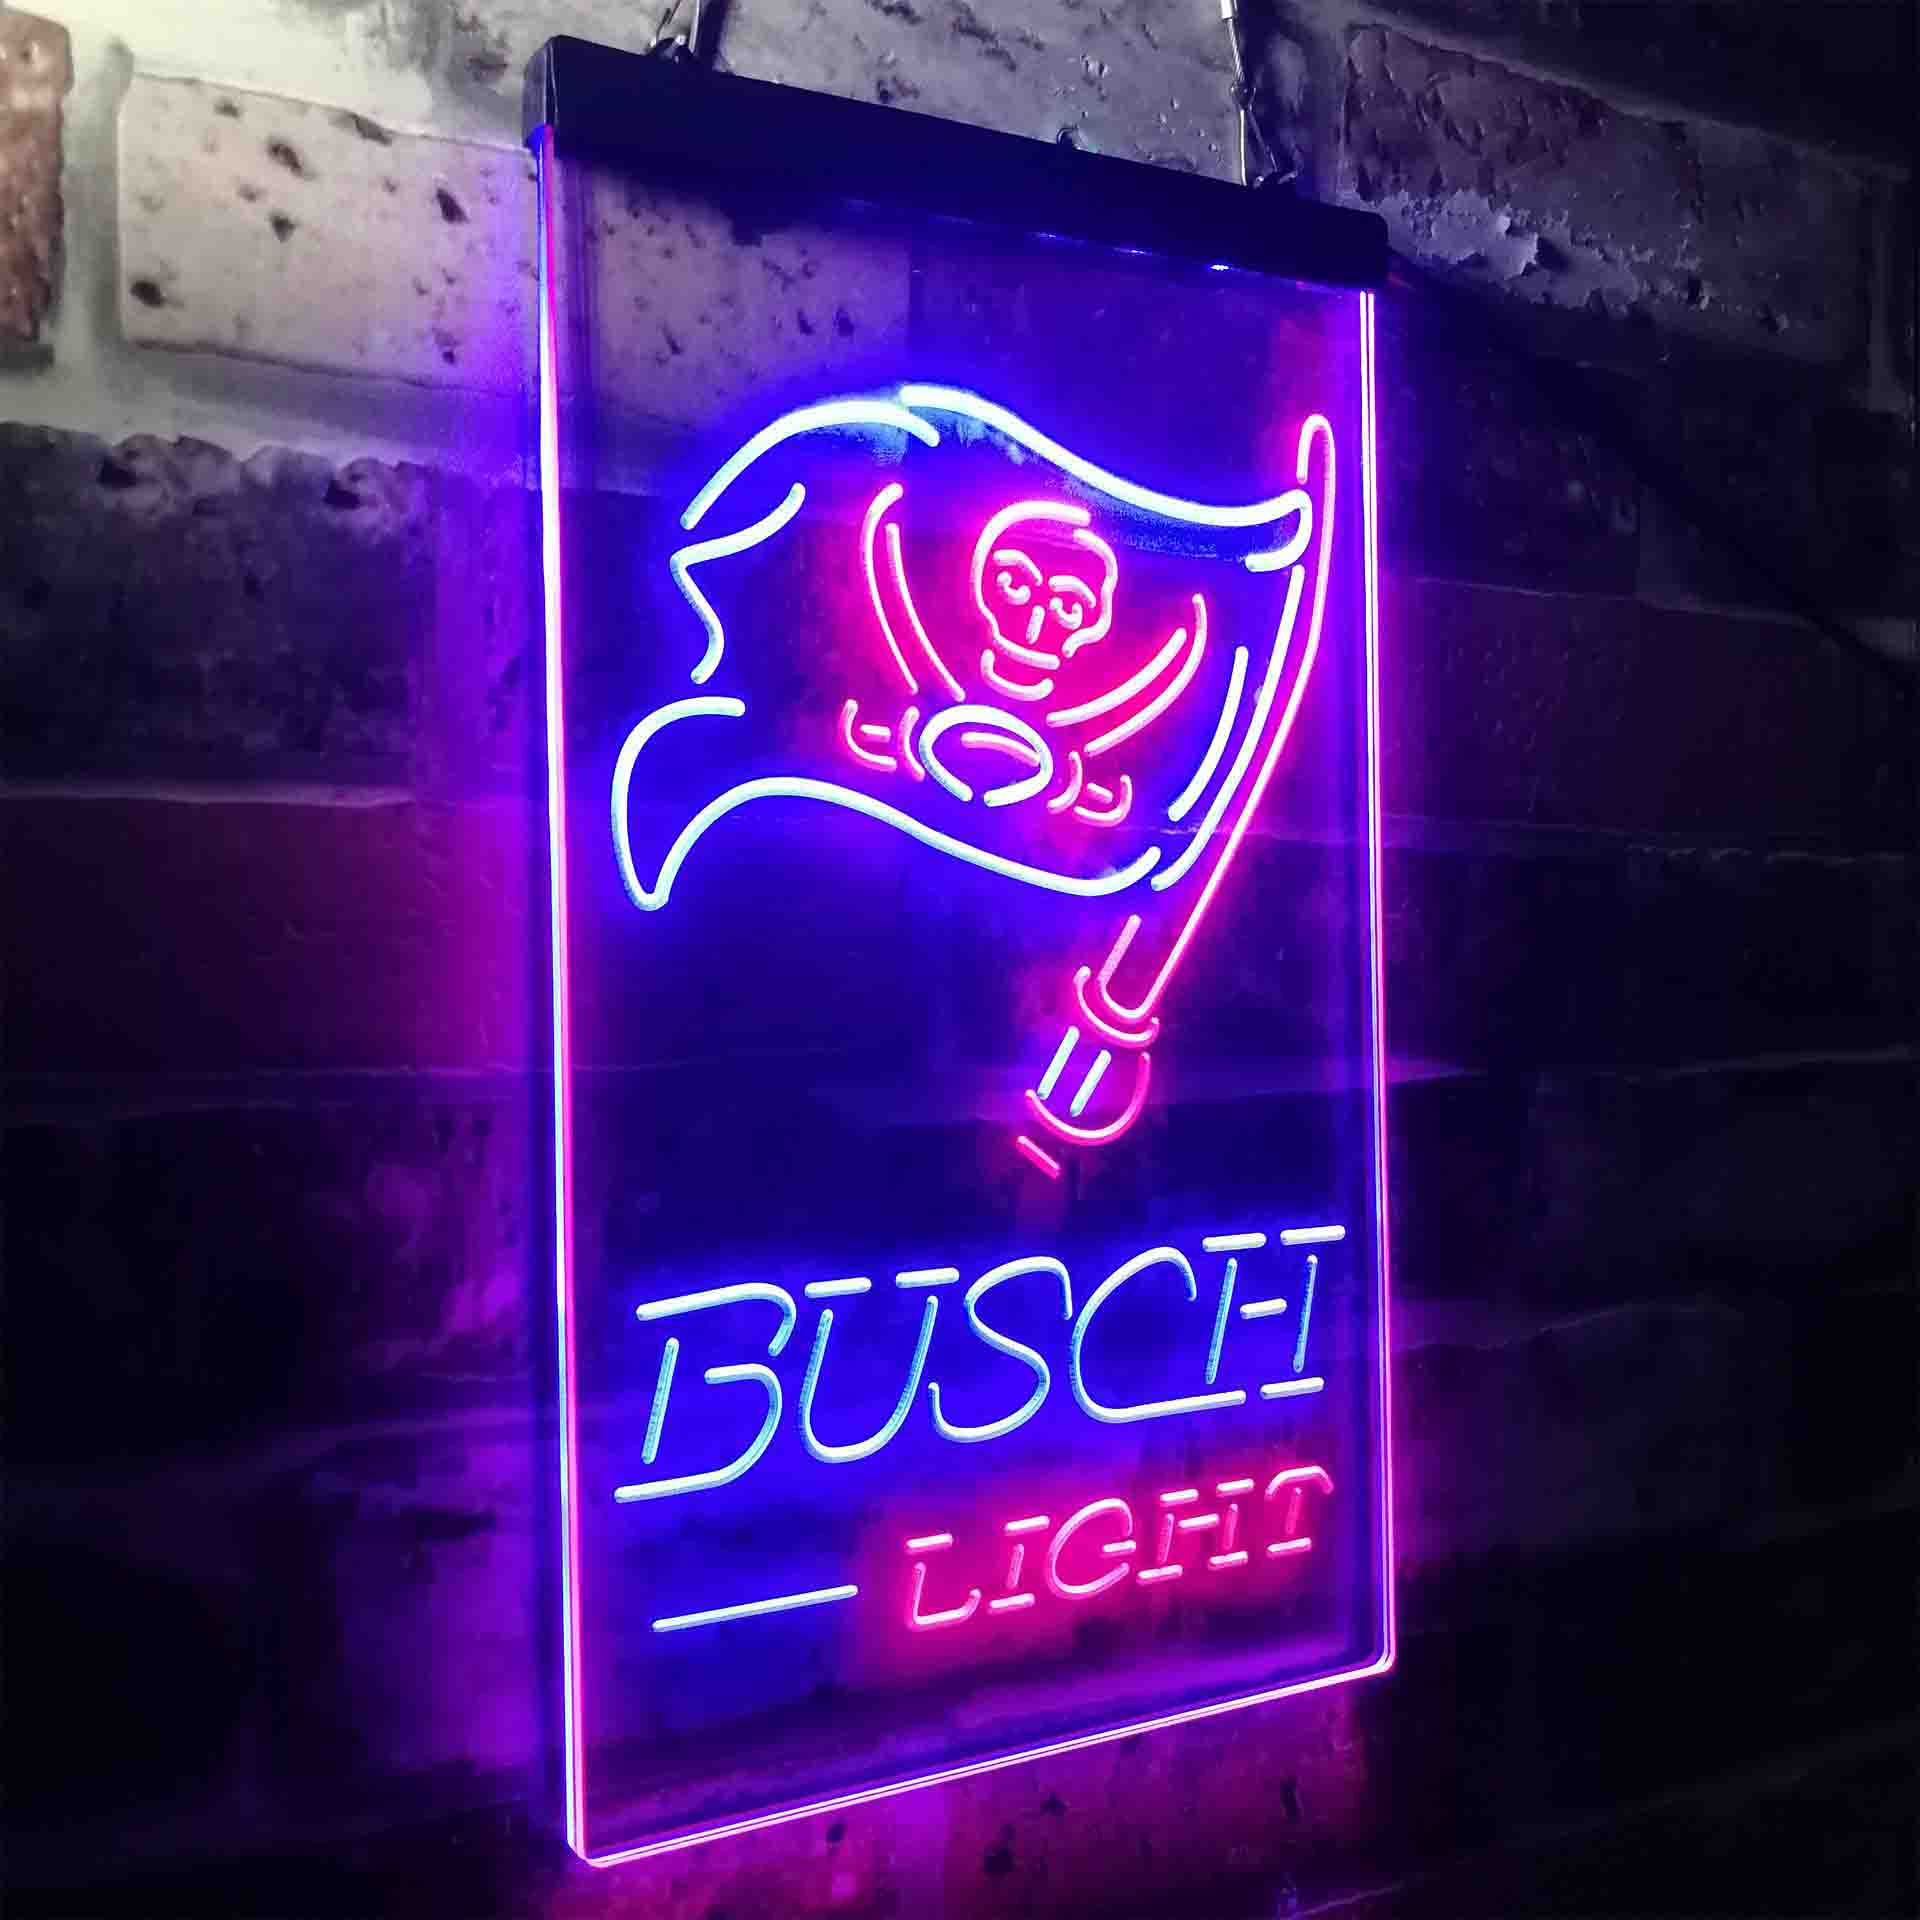 Tampa Bay Buccane Busch Light LED Neon Sign